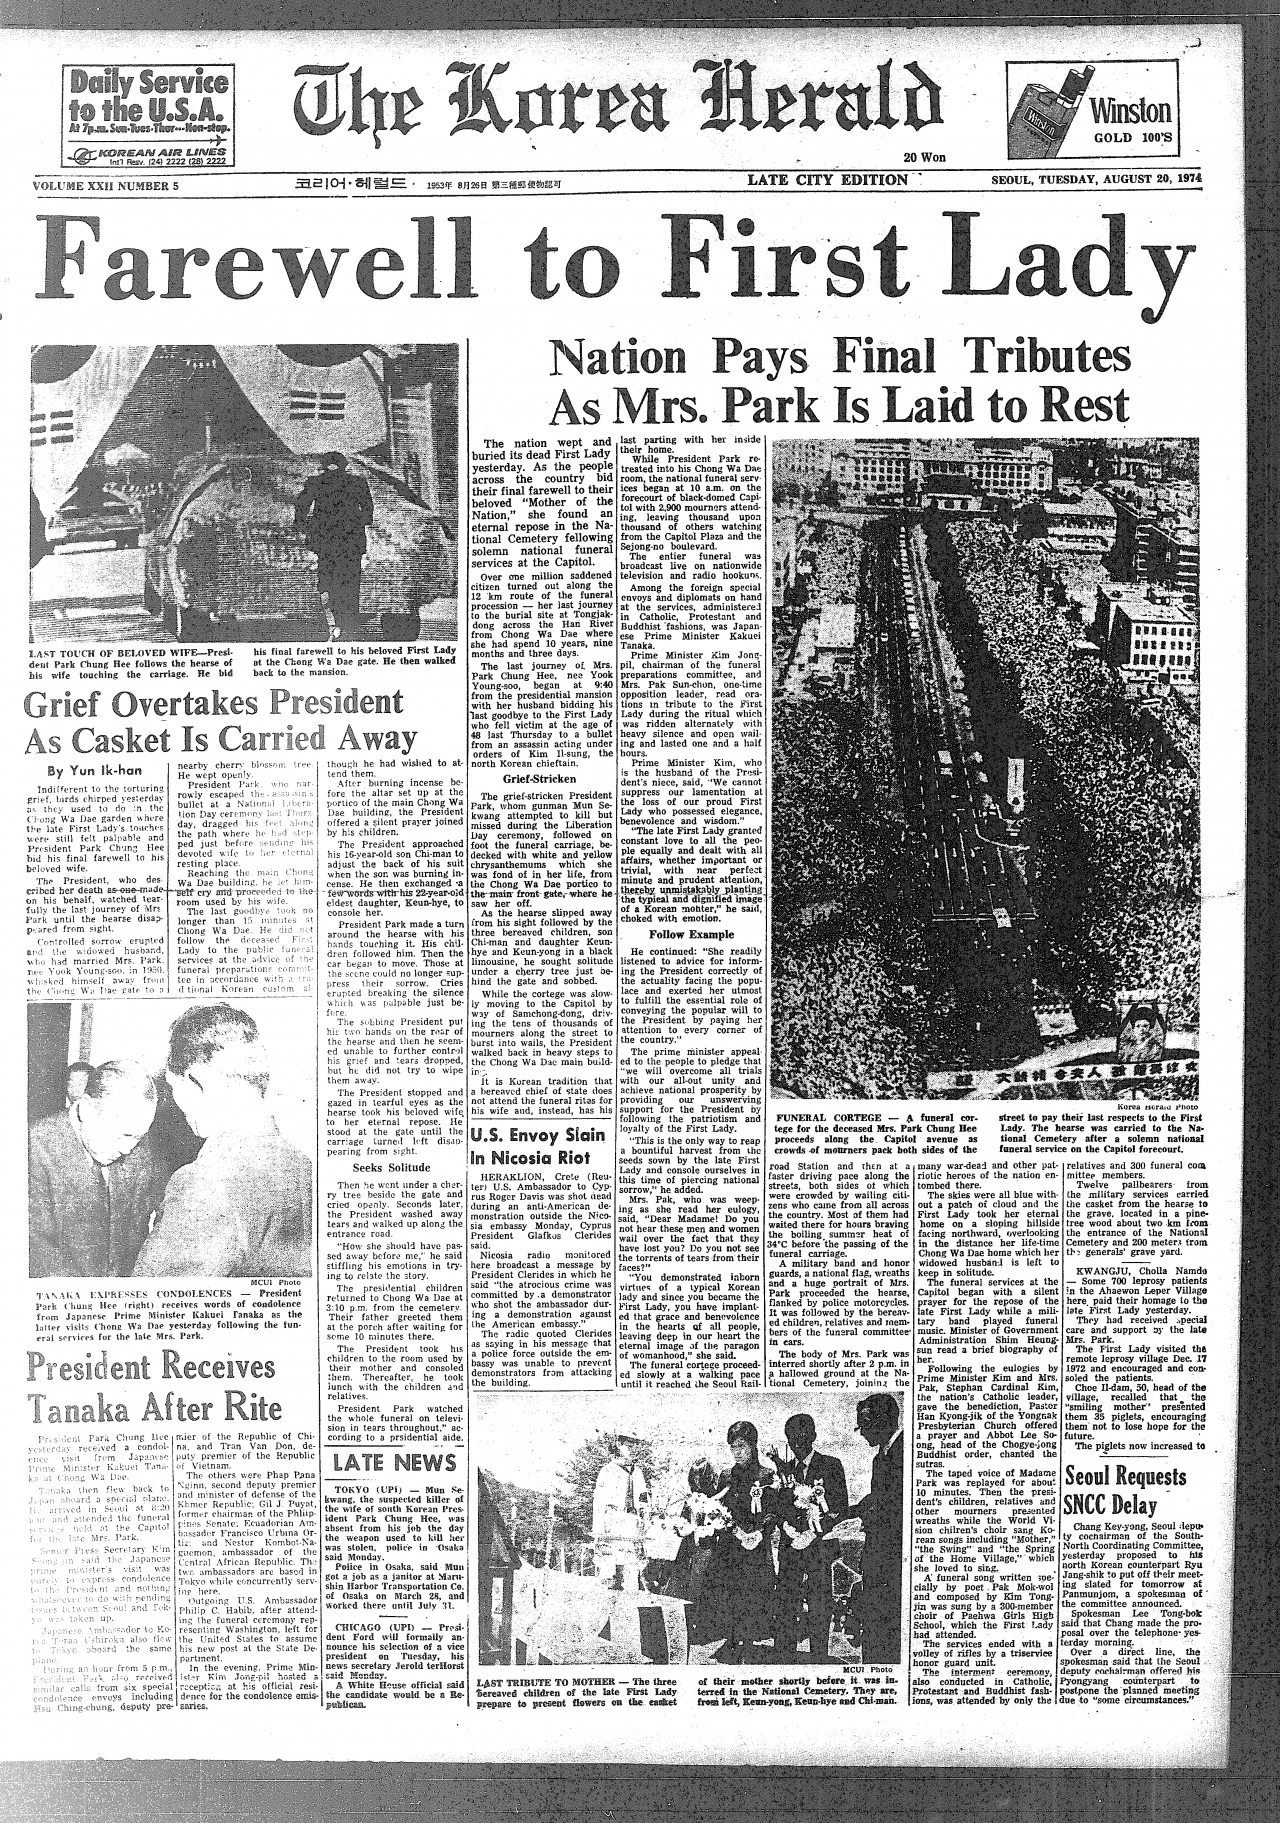 The front page of the Aug. 20, 1974 edition of The Korea Herald (The Korea Herald)